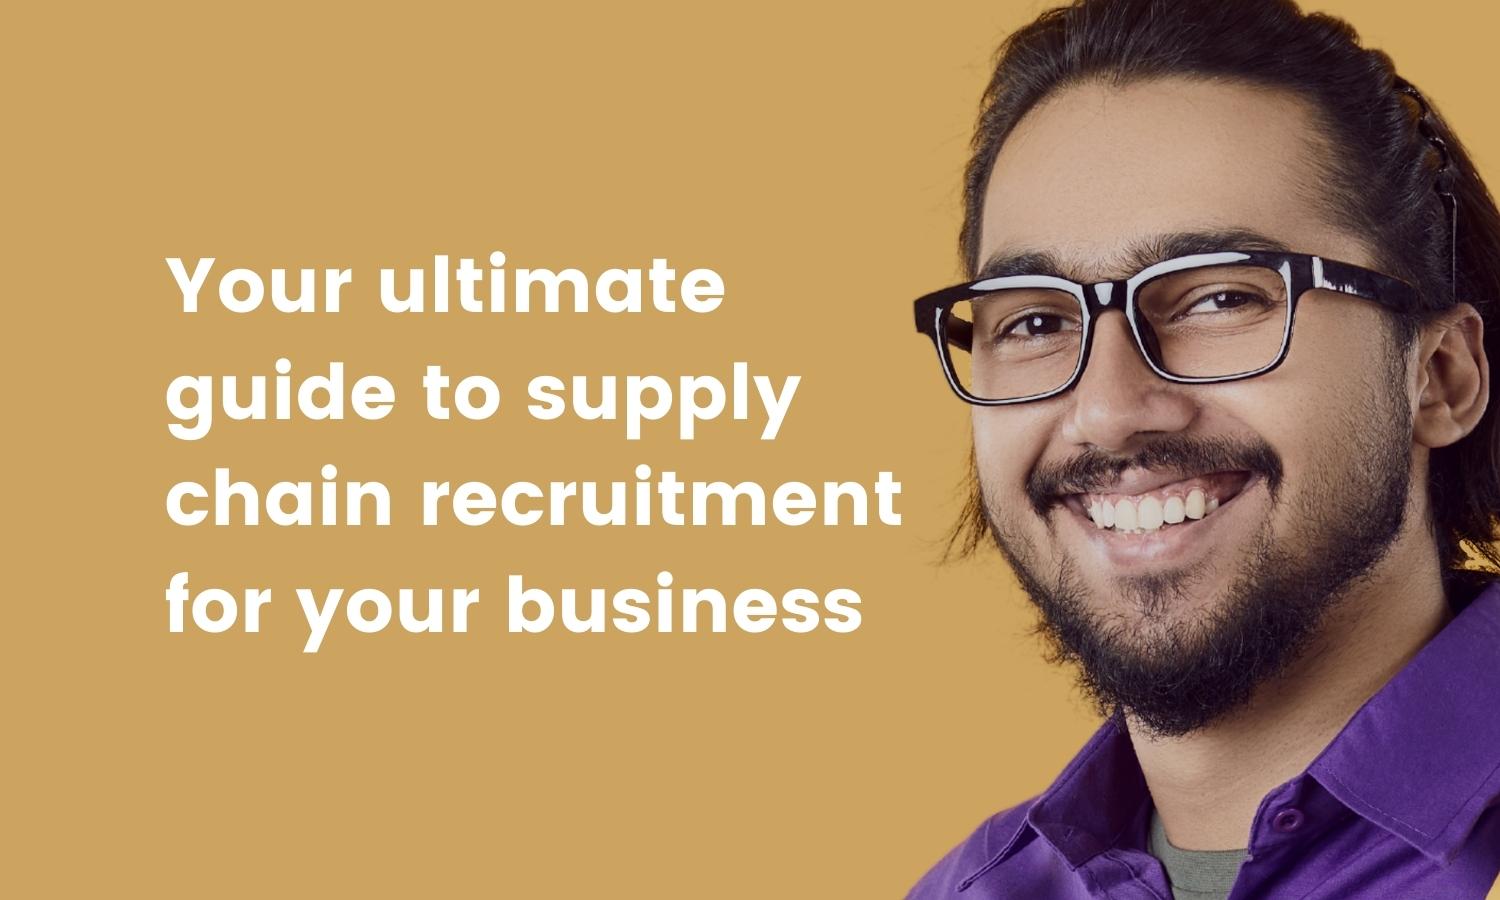 Your ultimate guide to supply chain recruitment for your business